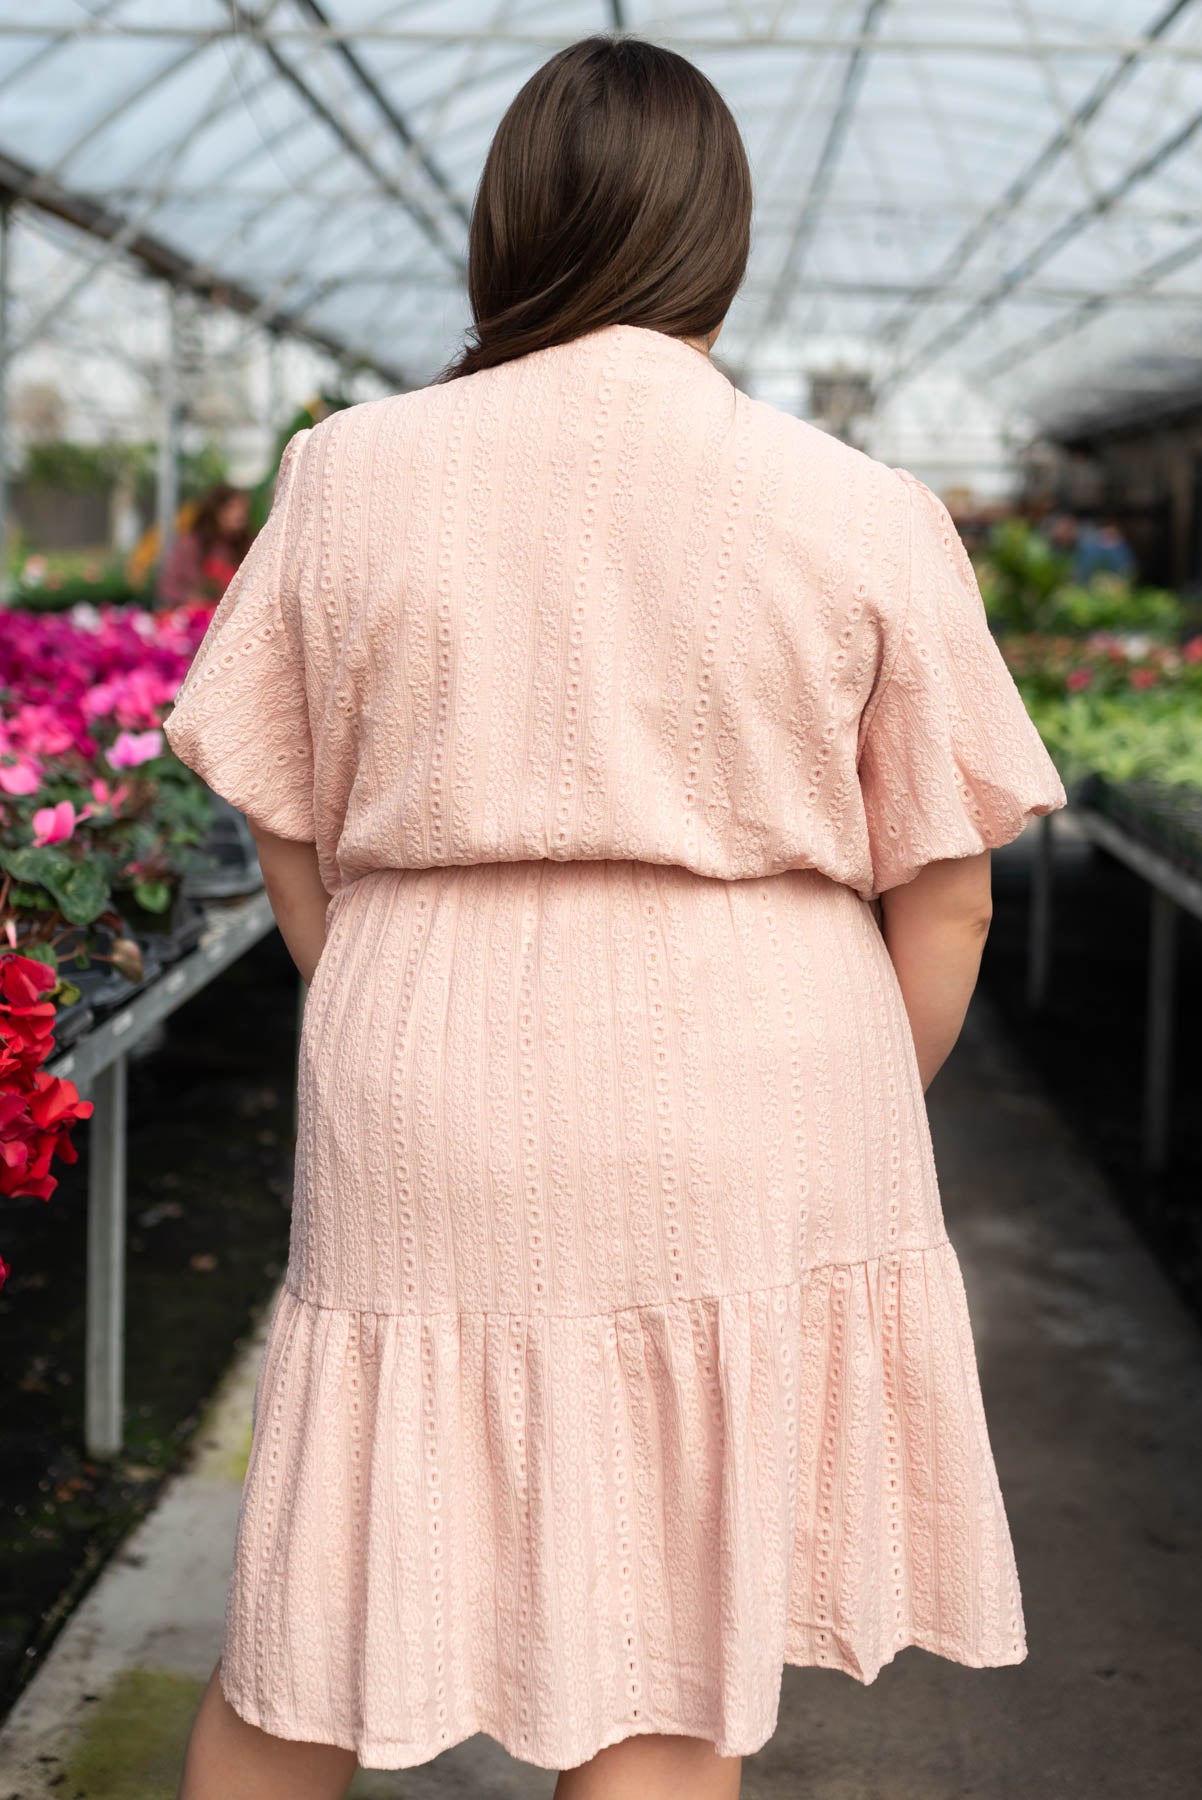 Back view of the blush lace dress